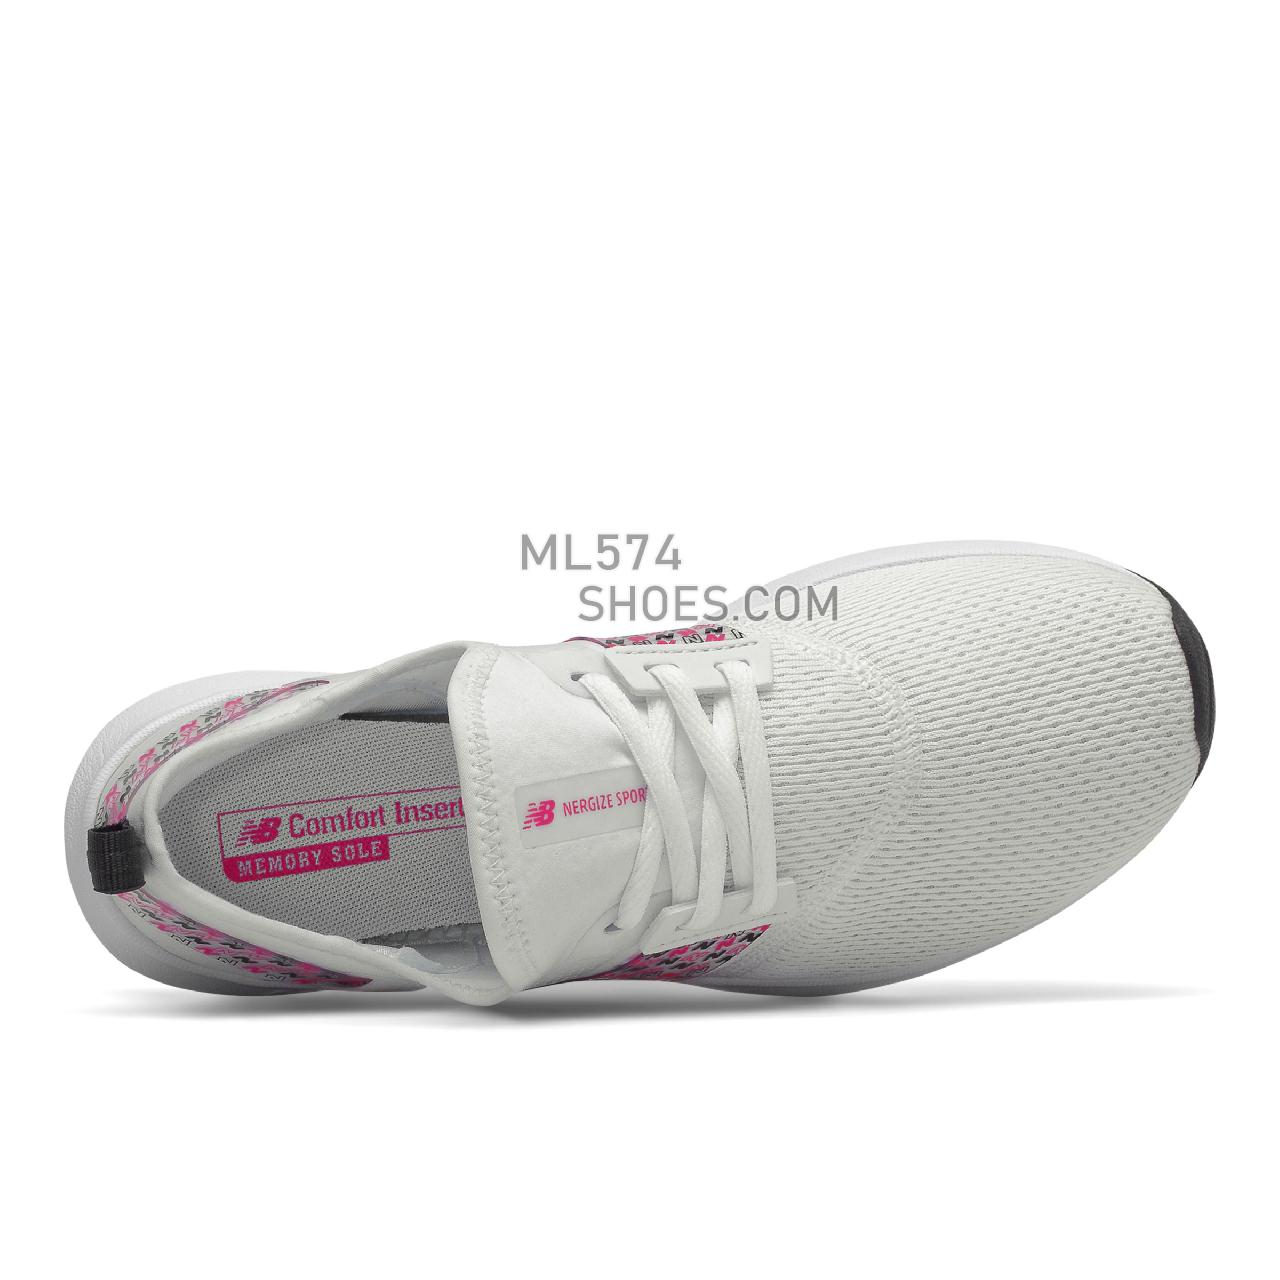 New Balance NB Nergize Sport - Women's Sport Style Sneakers - Nb White with Pink Glo - WNRGSPN1